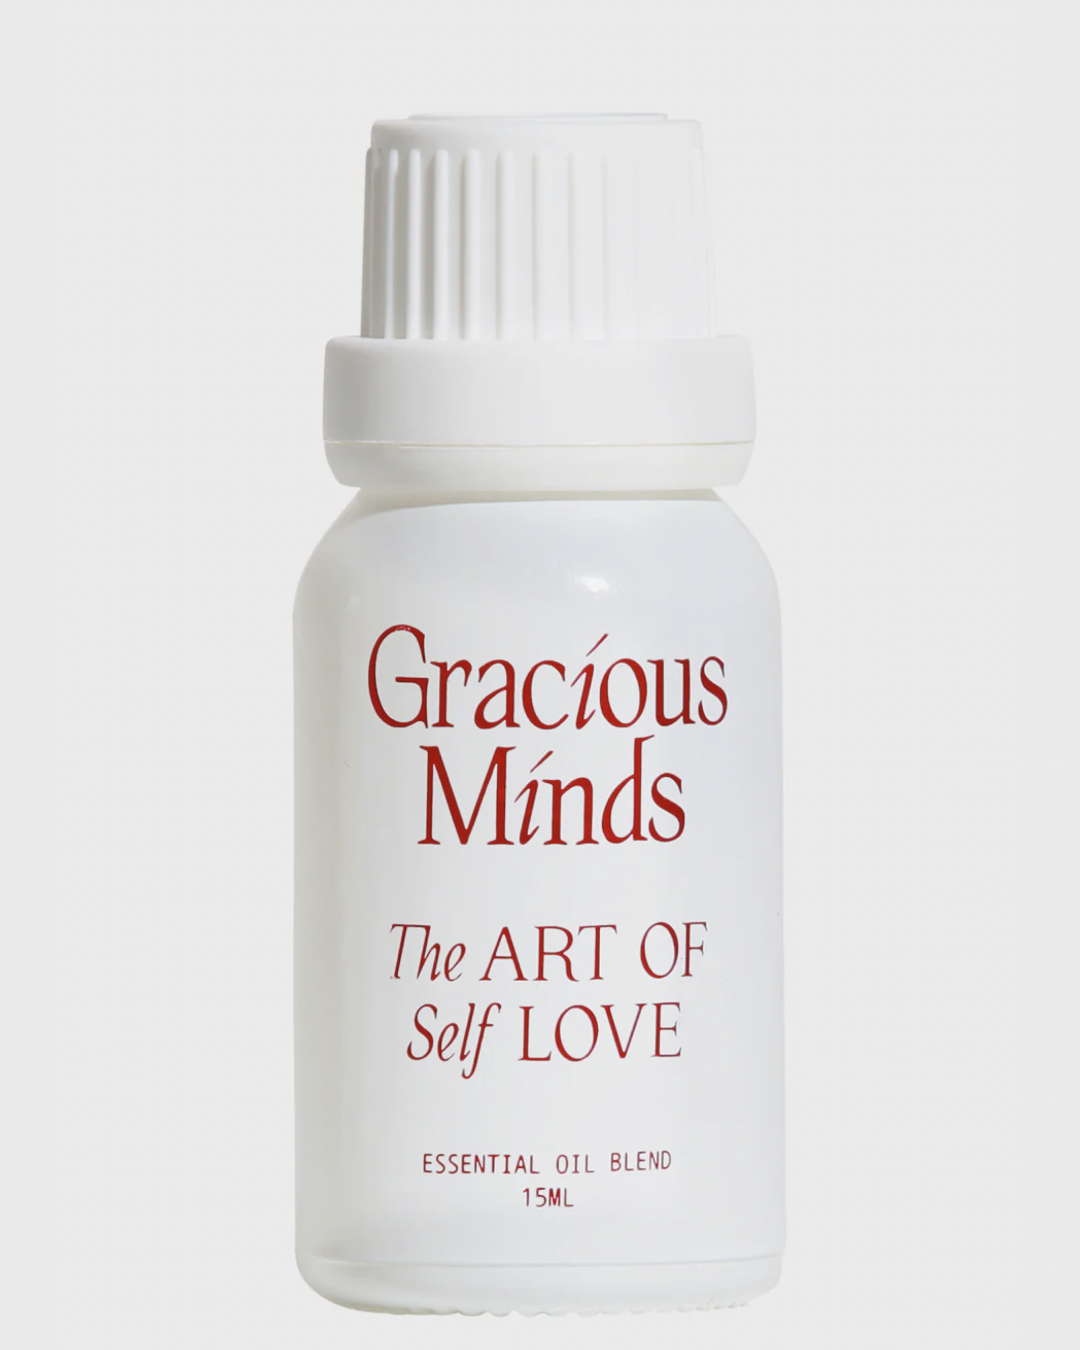 The Art of Self Love Essential Oil Blend Essential Oils by Gracious Minds - Prae Wellness